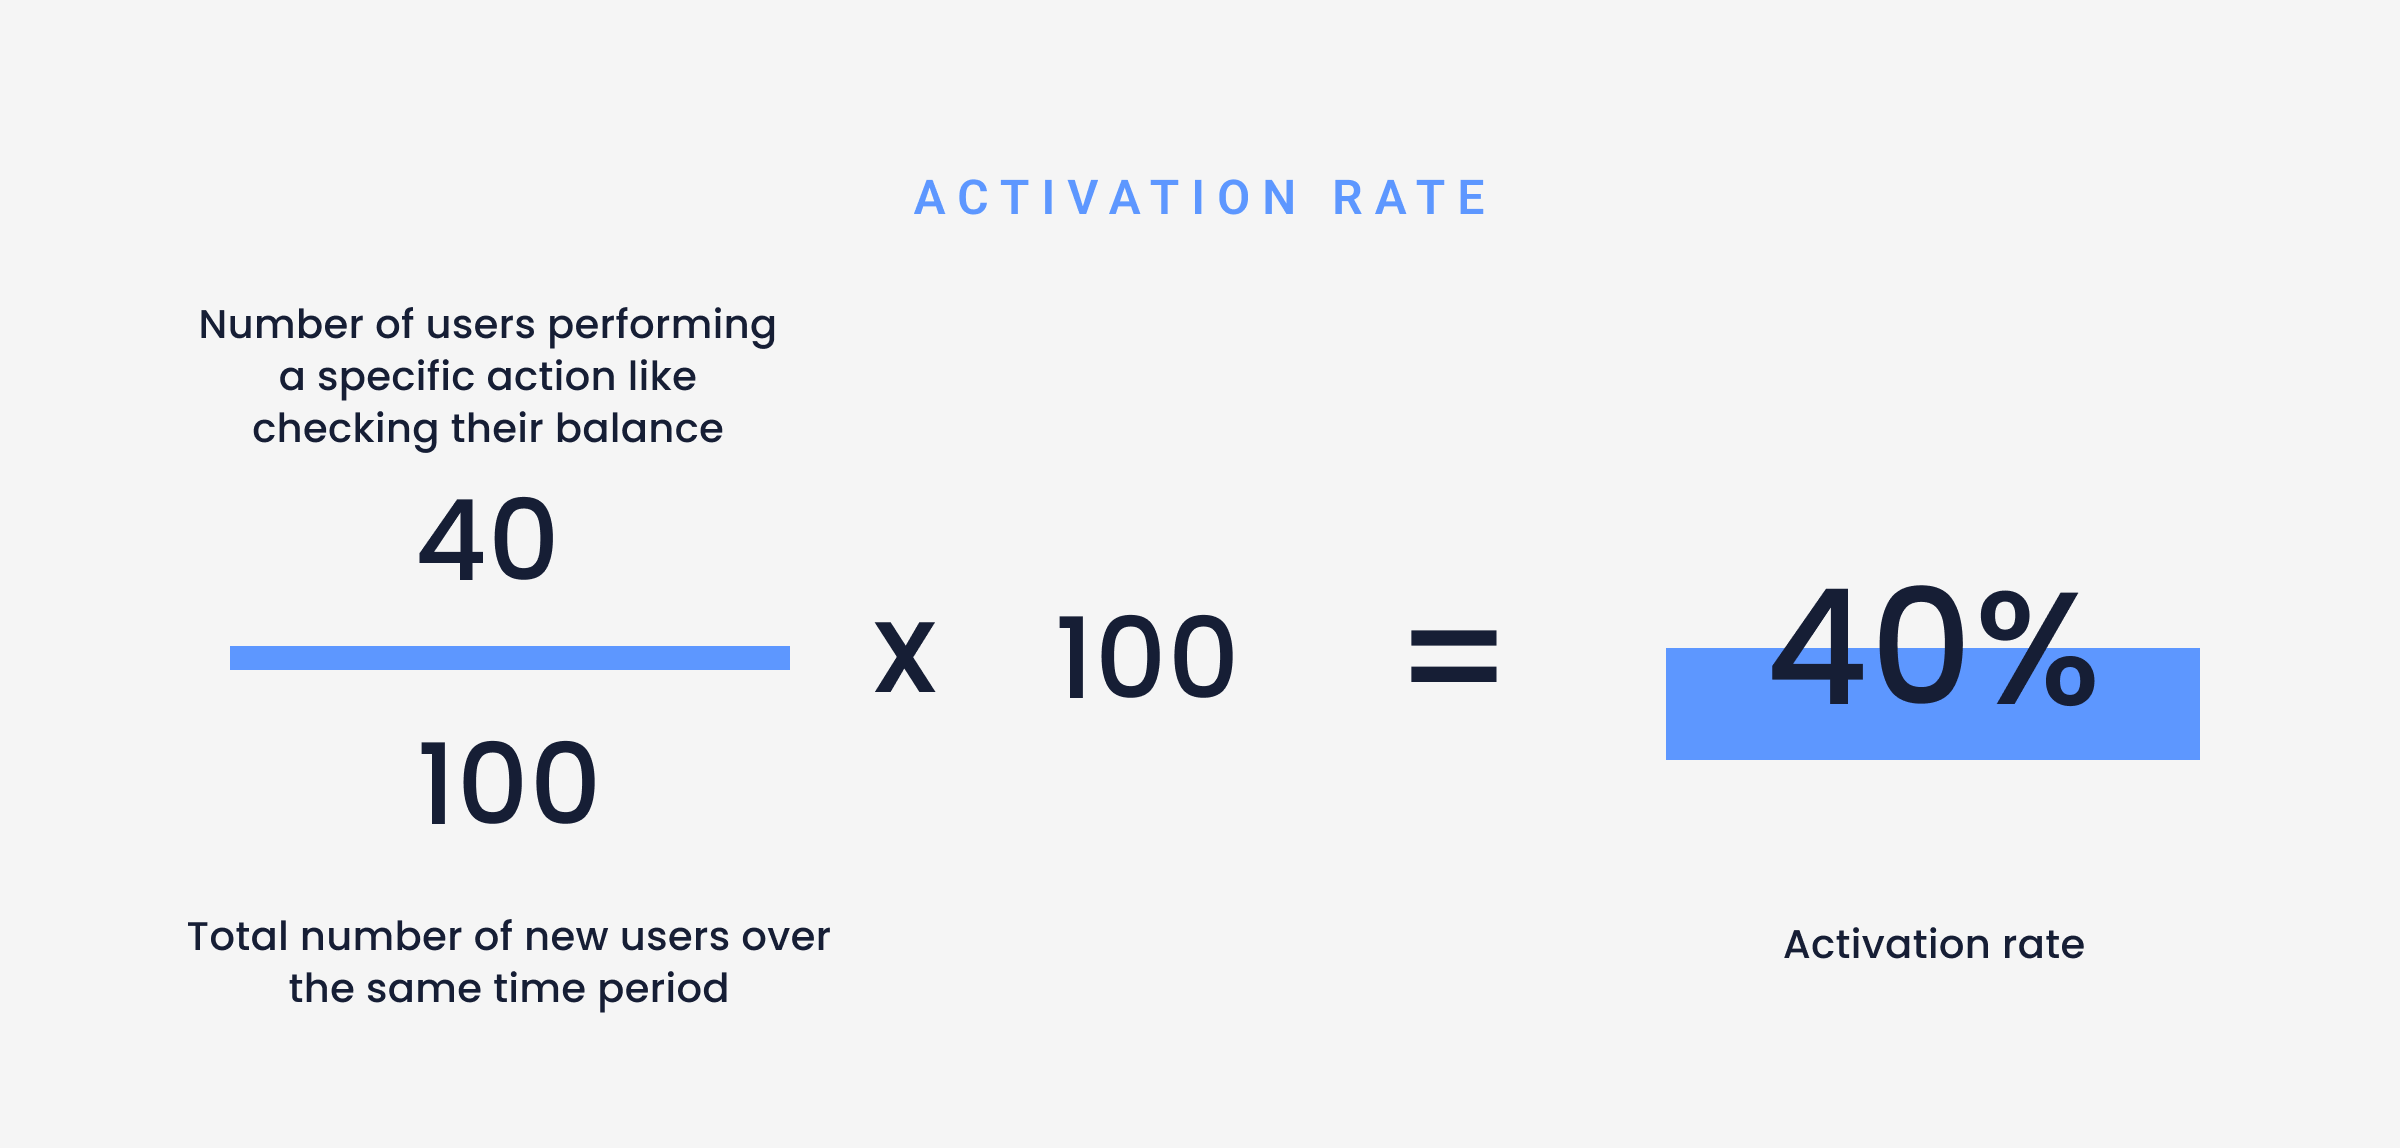 kpis to measure onboarding success-activation rate